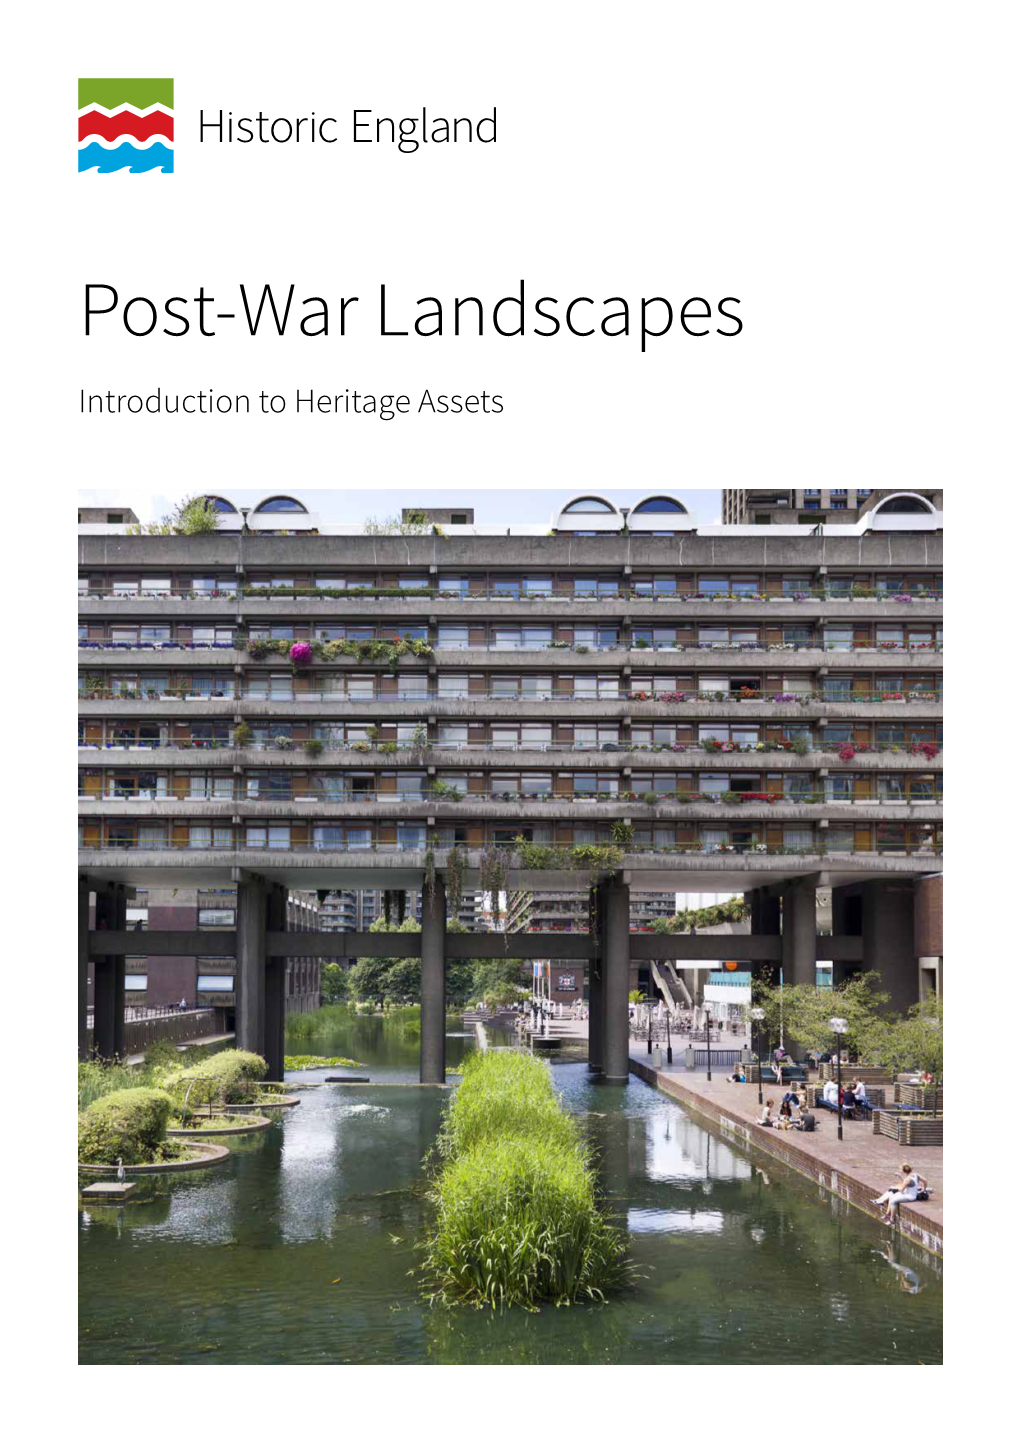 Post-War Landscapes Introduction to Heritage Assets Summary